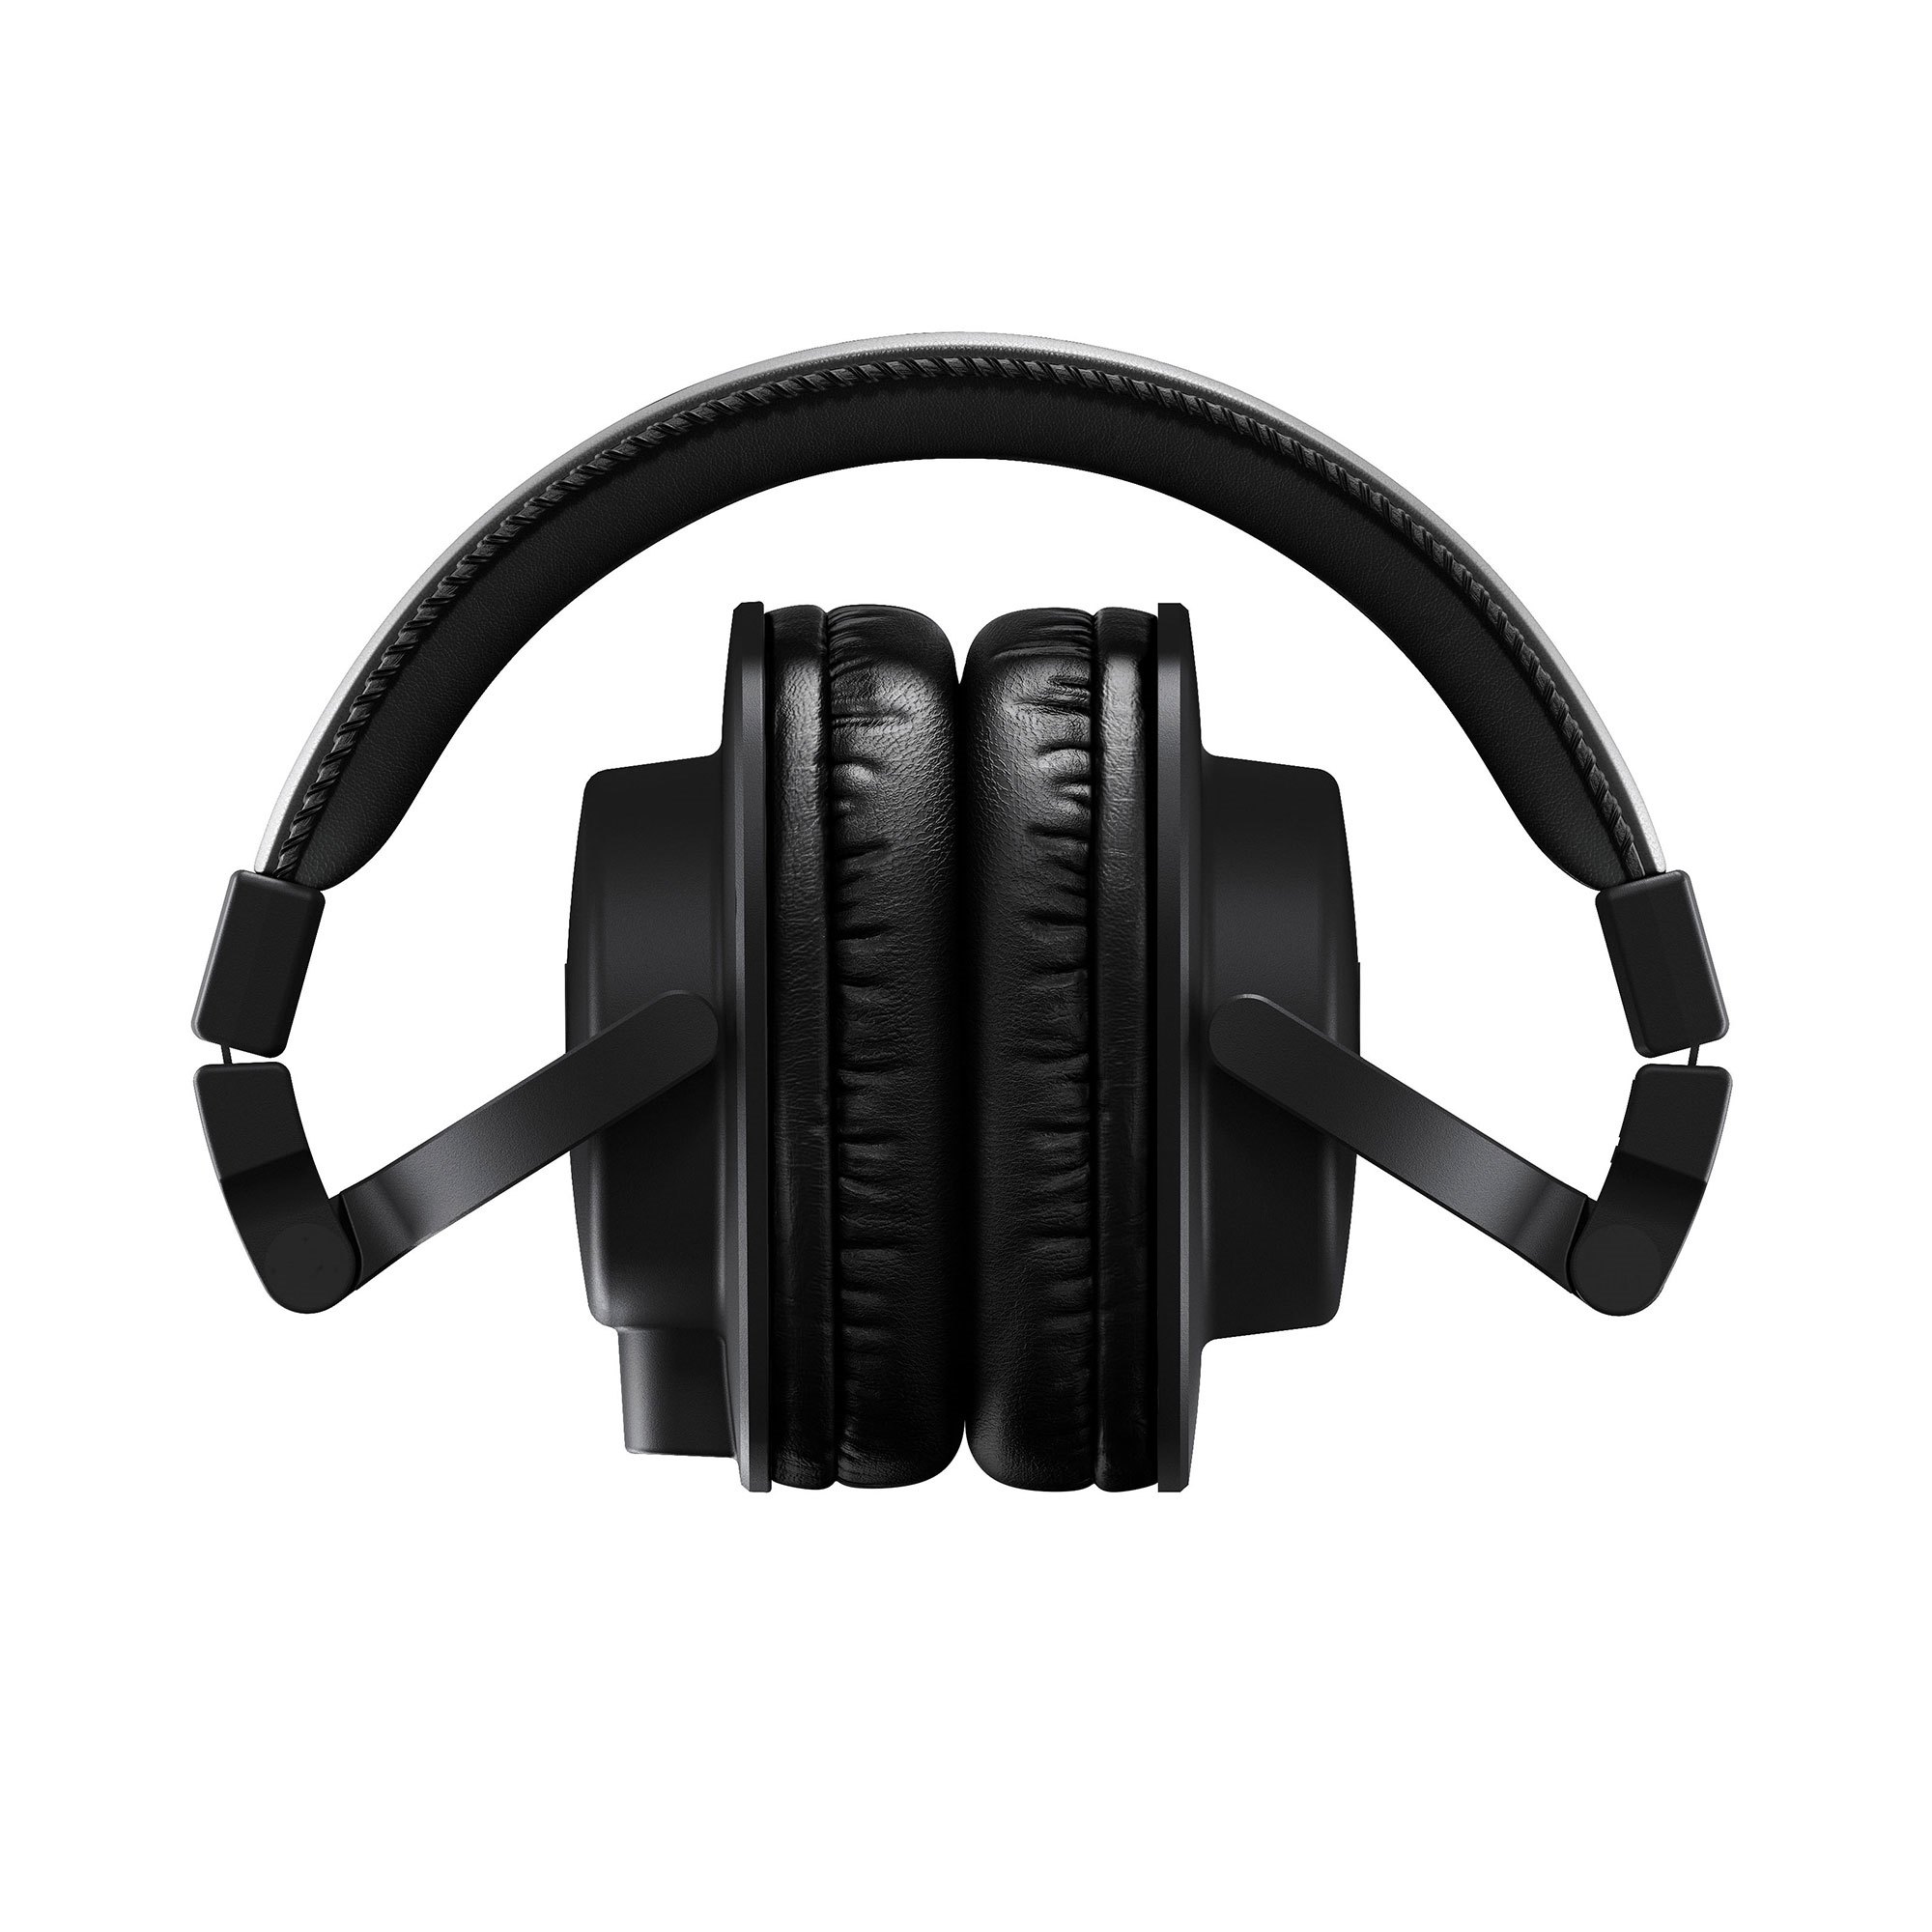 HPH-MT5 - Overview - Headphones - Professional Audio - Products